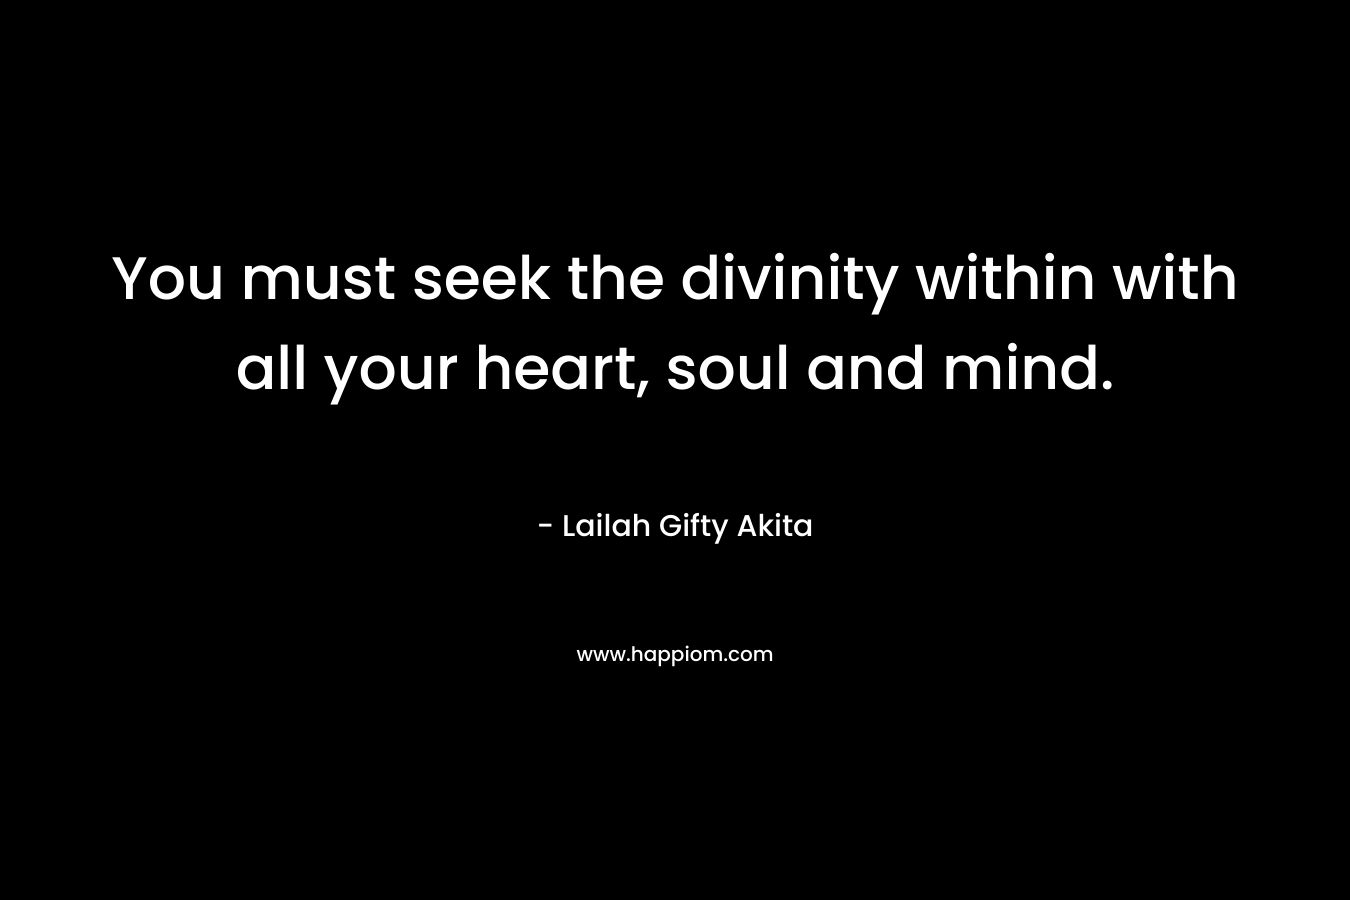 You must seek the divinity within with all your heart, soul and mind.